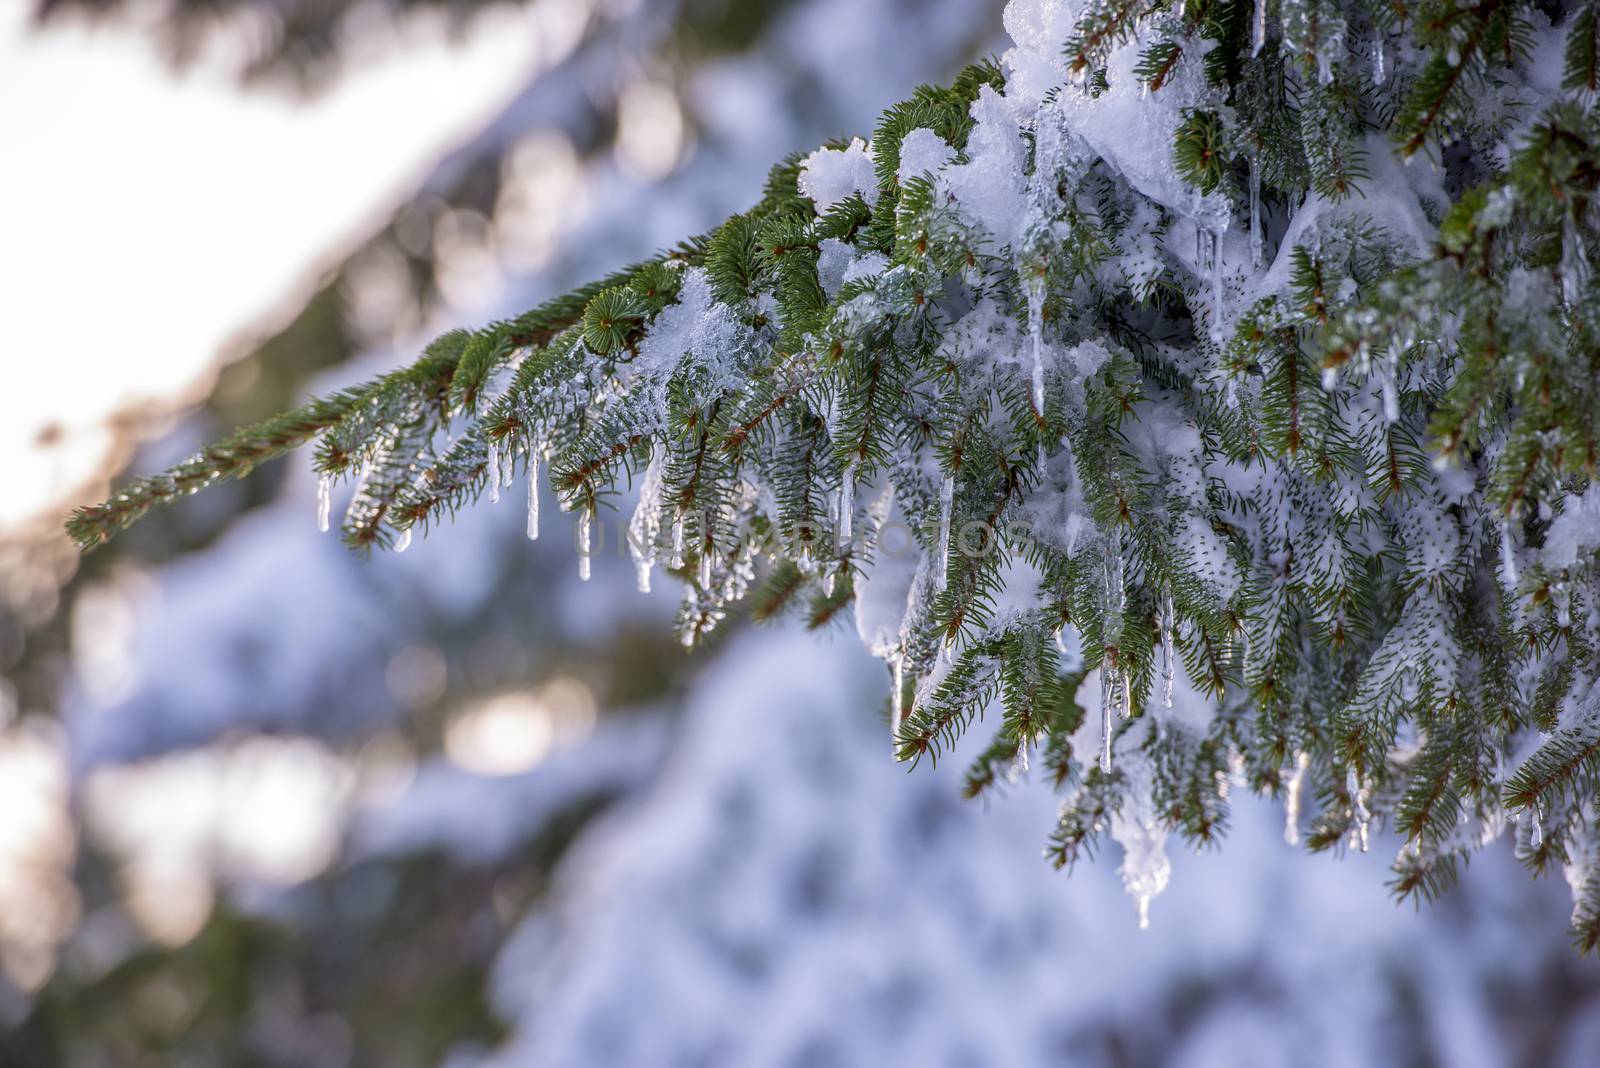 Spruce branches covered with snow and ice. Droplets of ice froze by asafaric